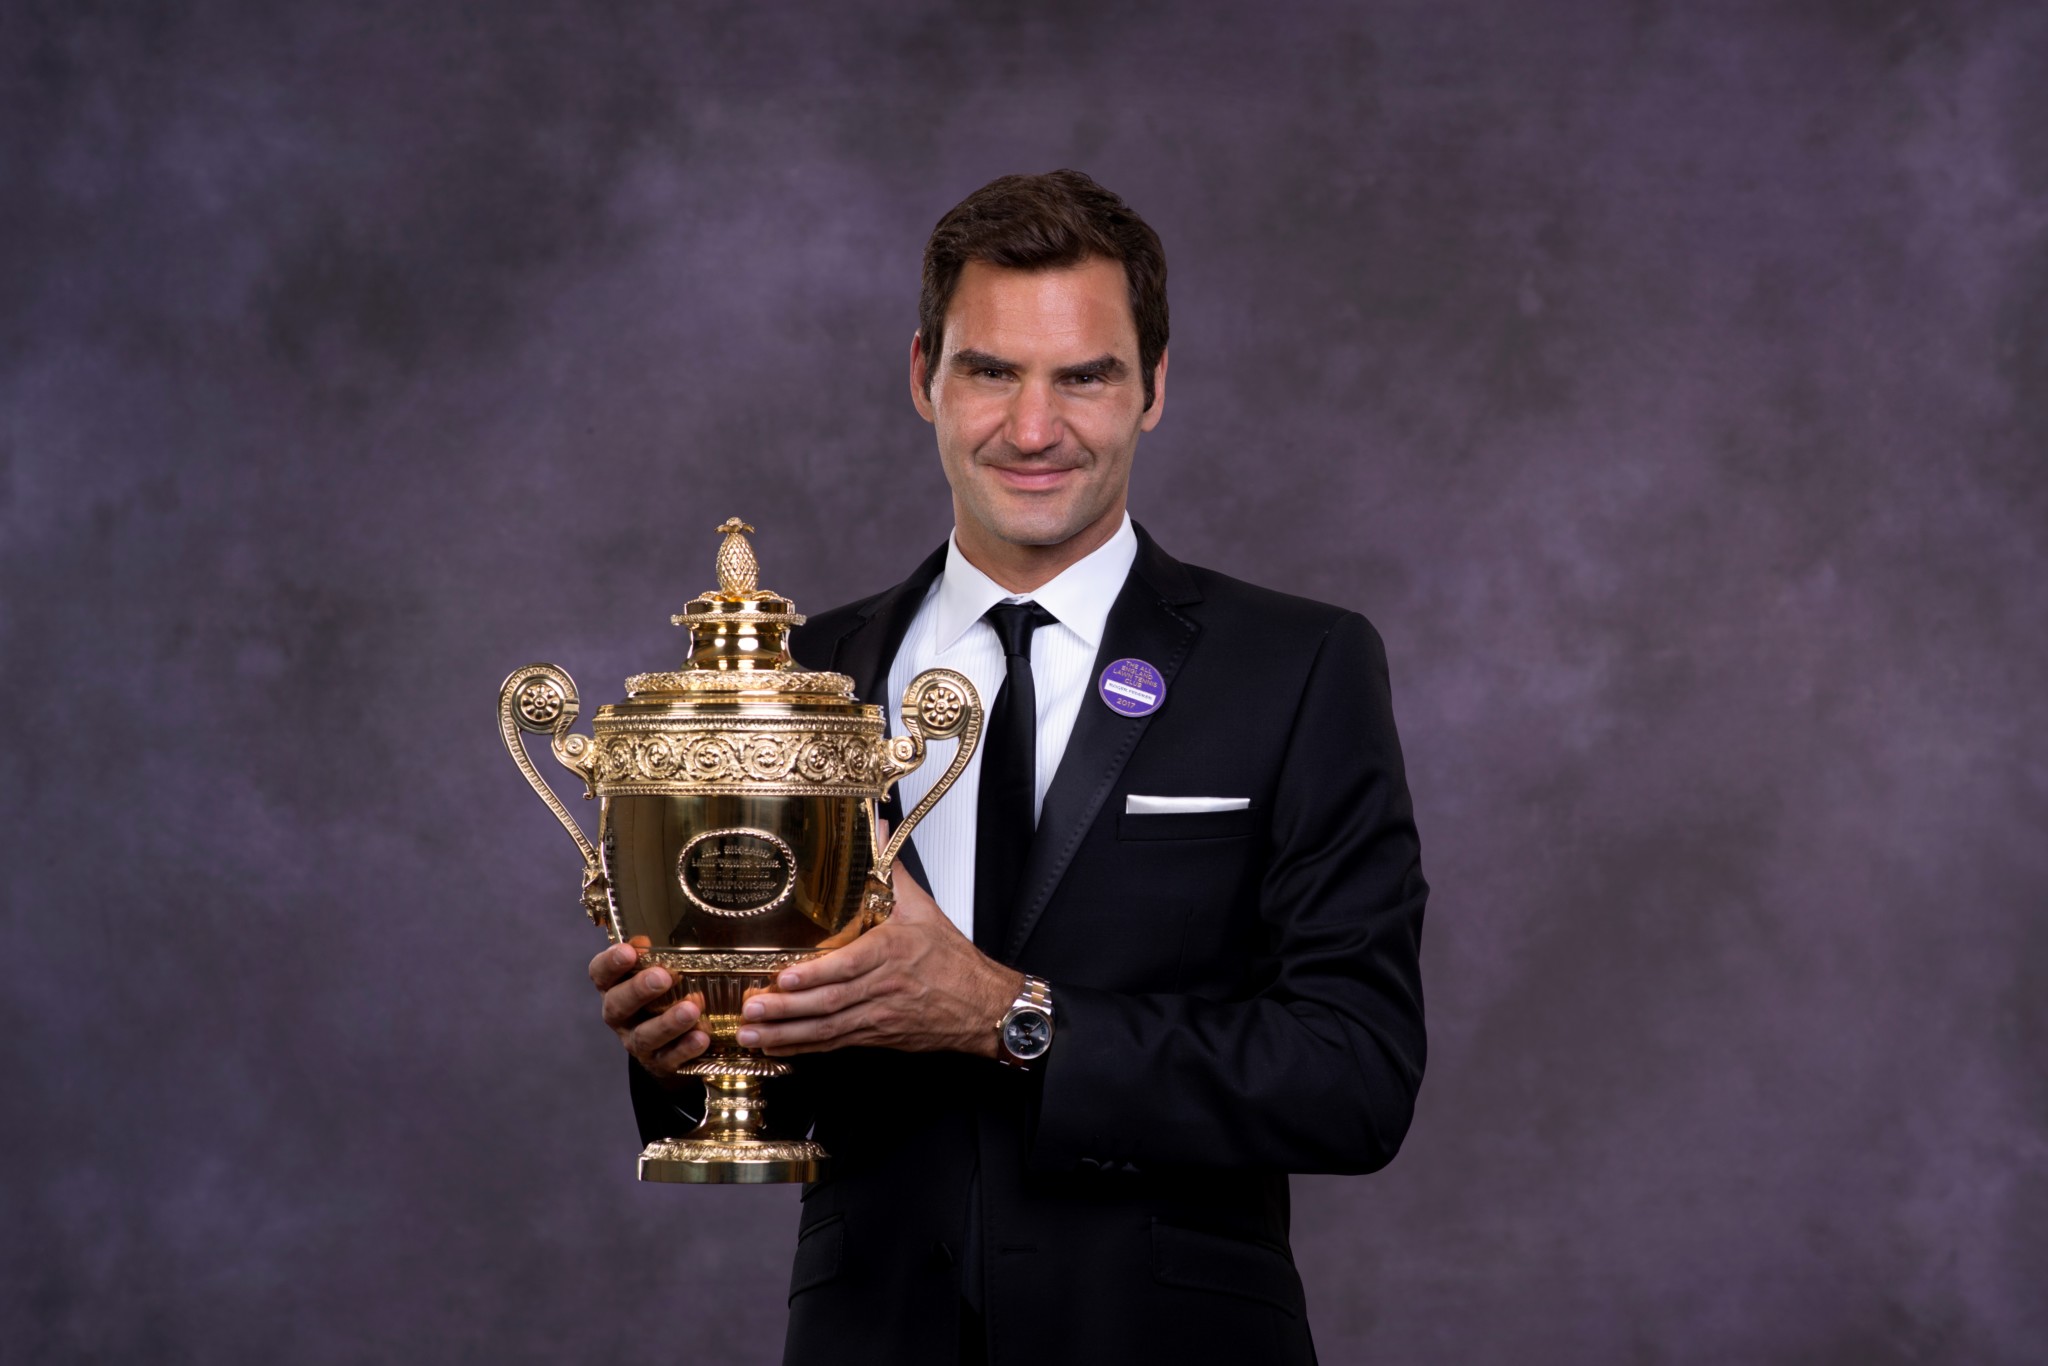 Roger federer poses with the trophy at the wimbledon winners dinner. (photo by aeltc - pool / getty images)